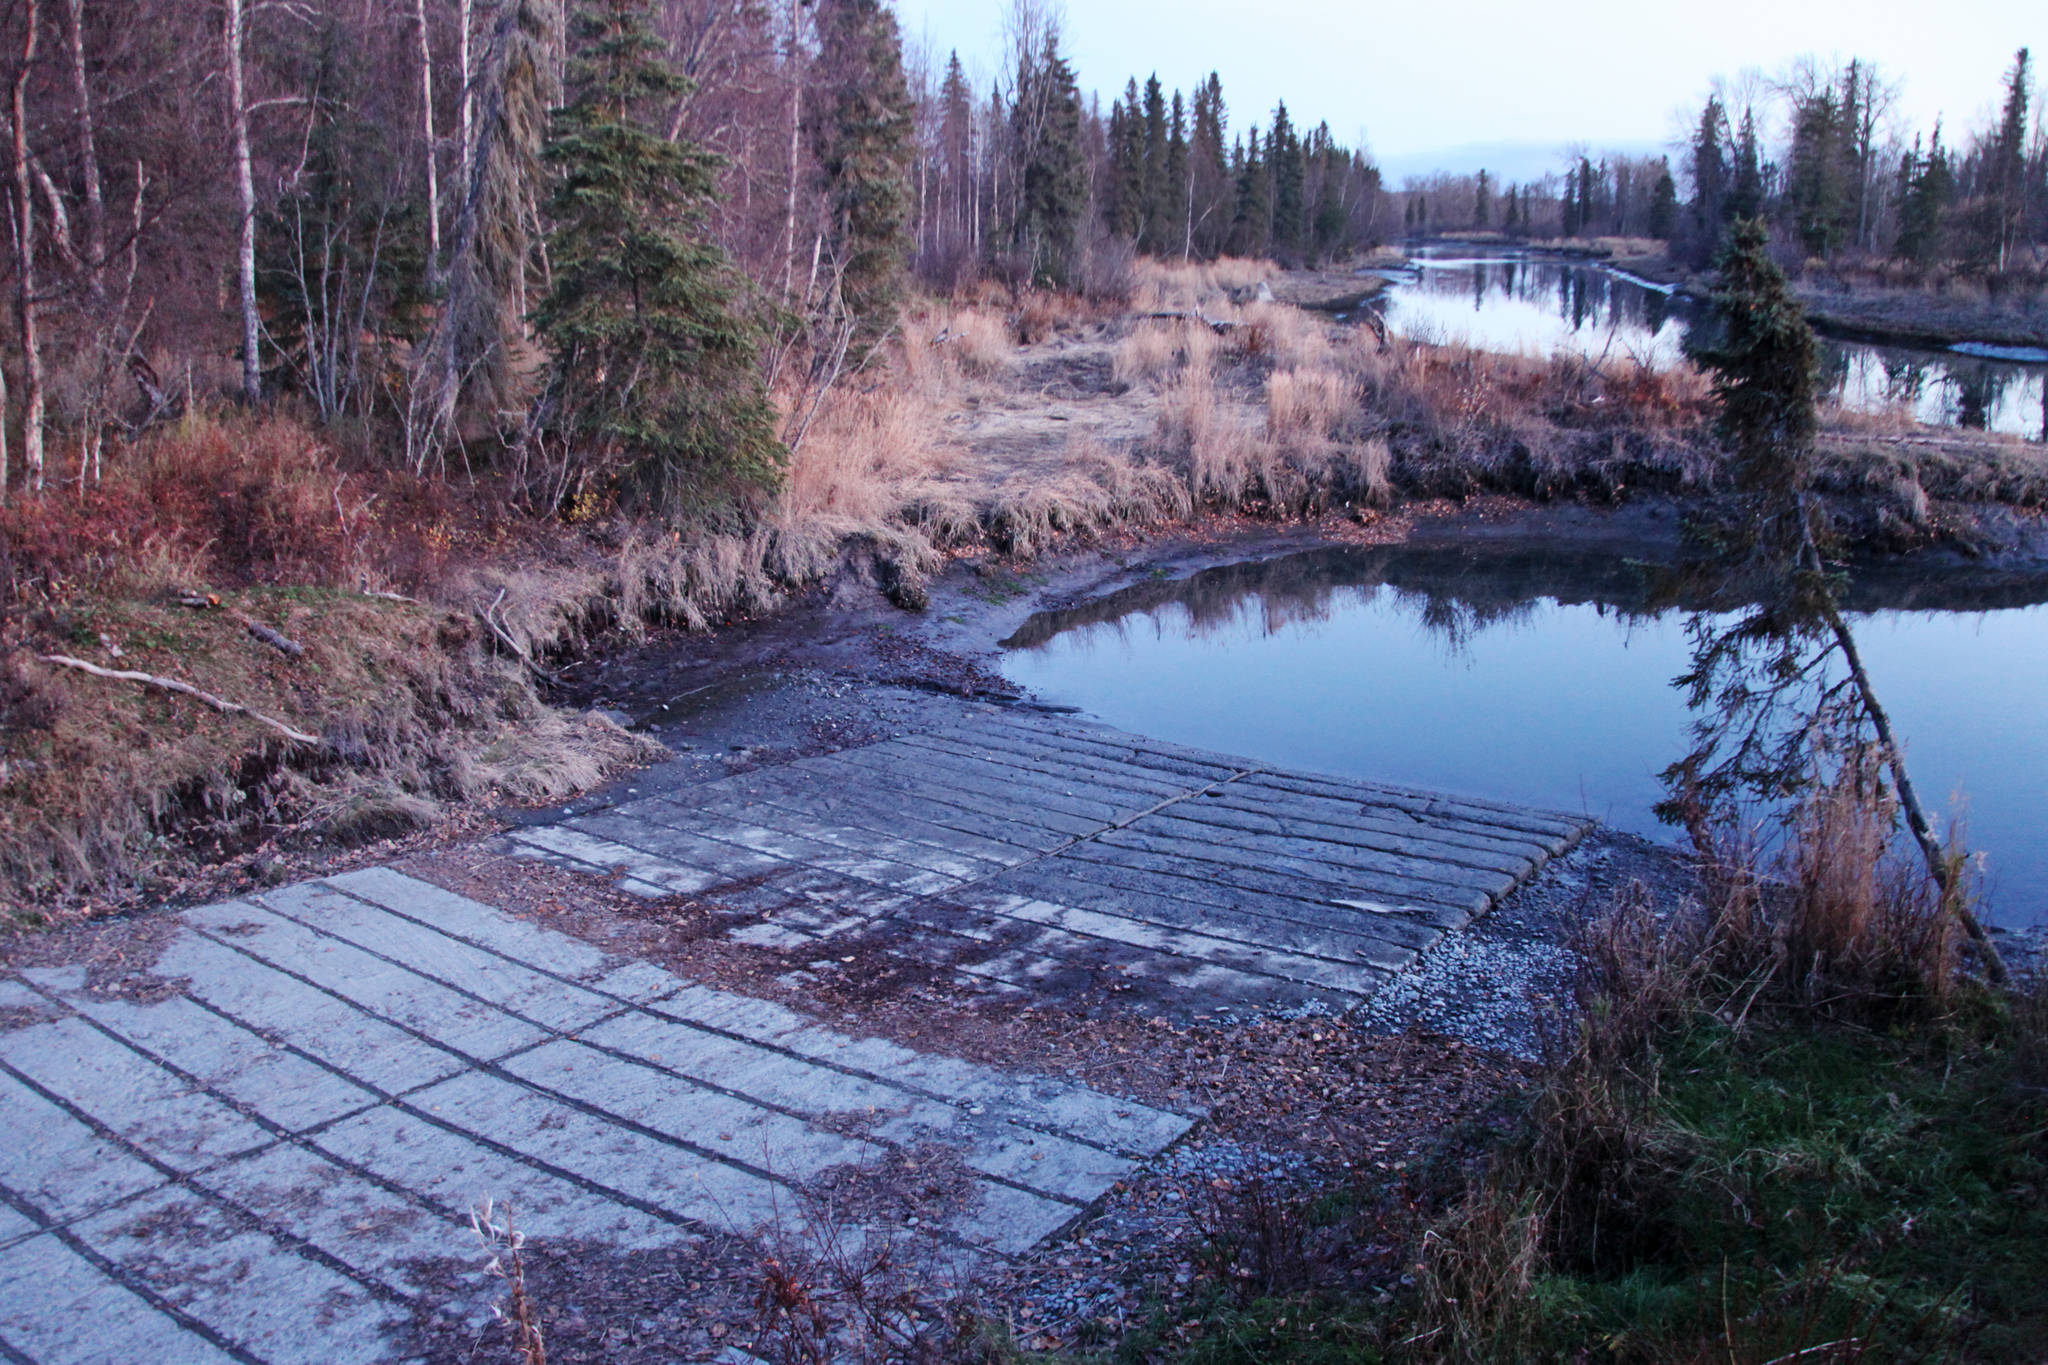 The Alaska Division of Parks and Outdoor Recreation is planning to widen the launch ramp at the state-owned Eagle Rock boat launch, seen here on Monday Oct. 16, 2017 in Kenai, Alaska. Work at the site — which also includes dredging the area around the ramp and adding a floating dock and barriers to protect the surrounding wetland — will take place during the winter and next spring. (Ben Boettger/Peninsula Clarion)